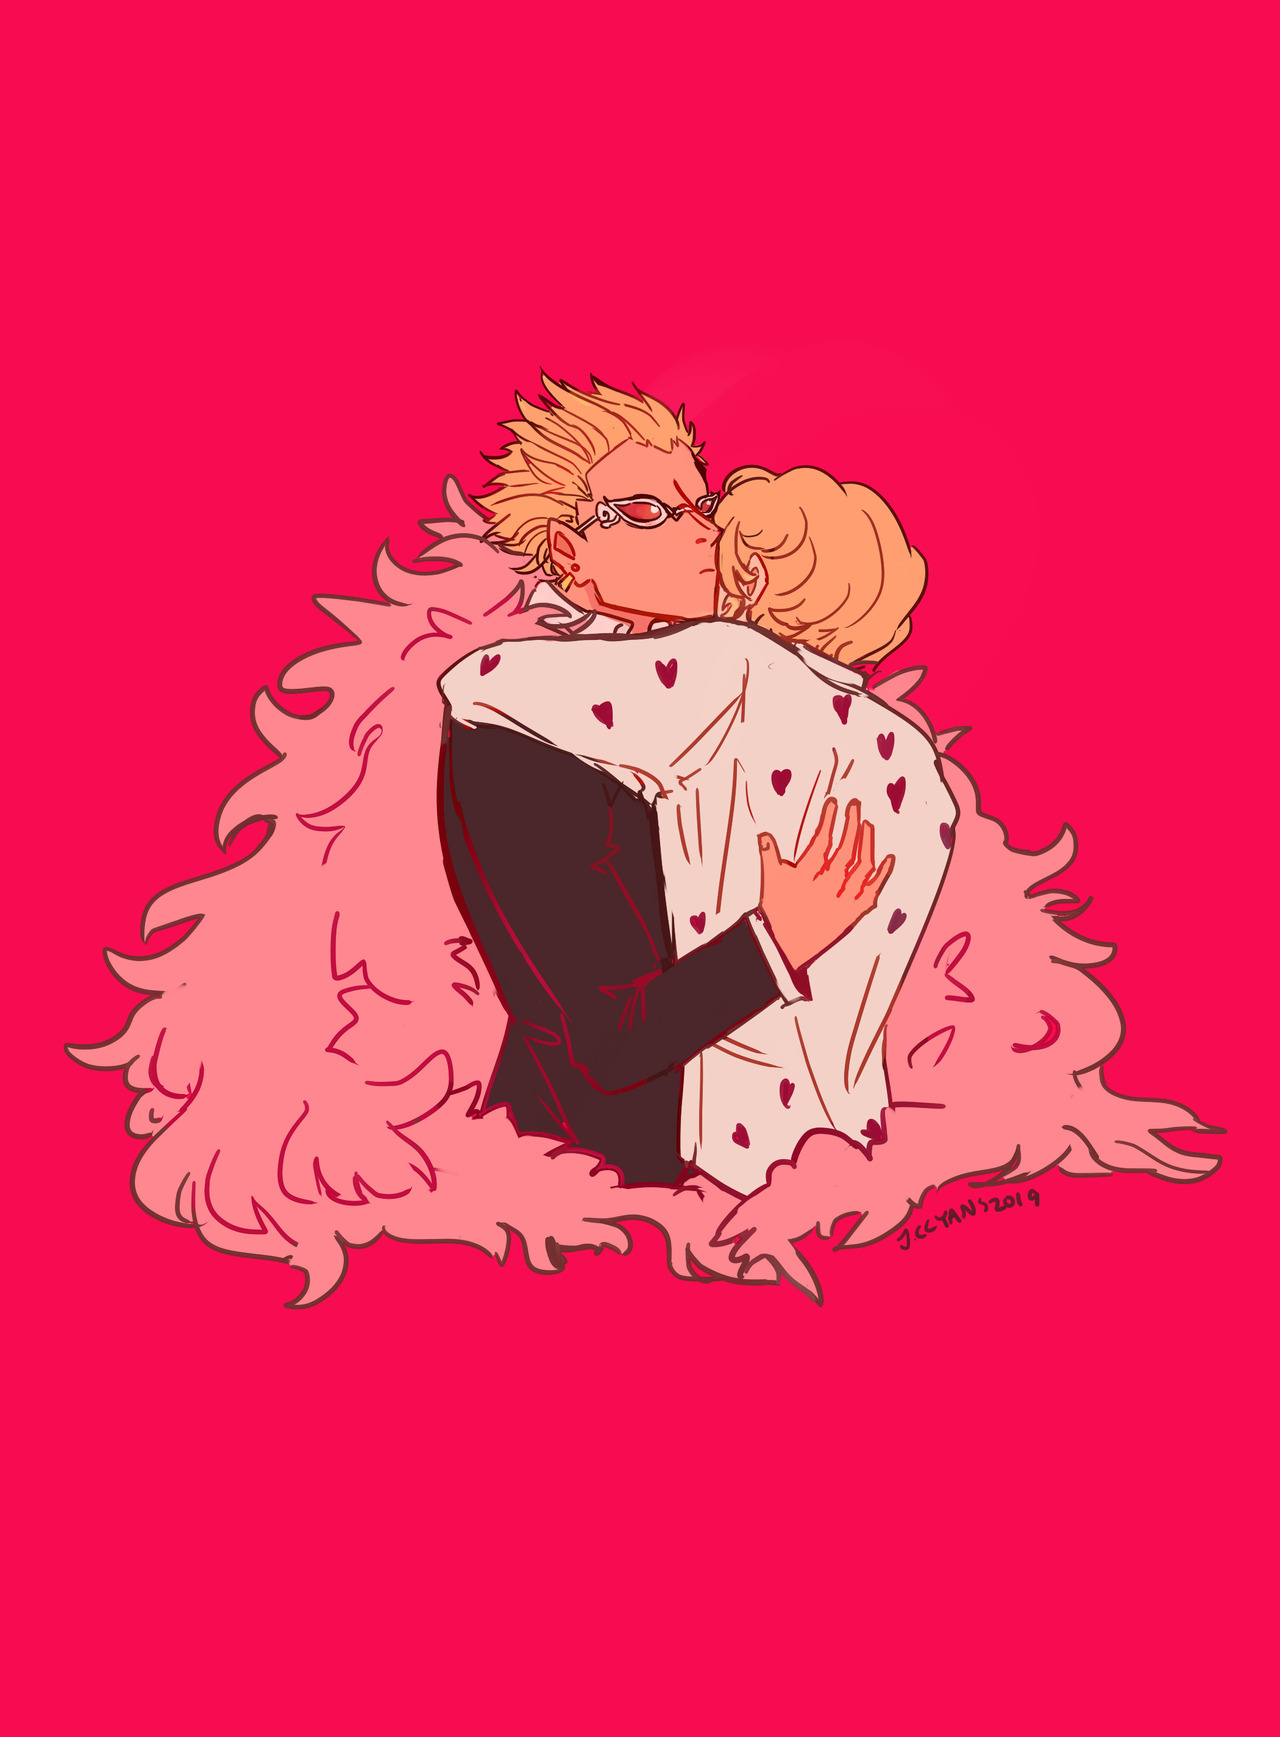 Doflamingo supposed that must've been true. 